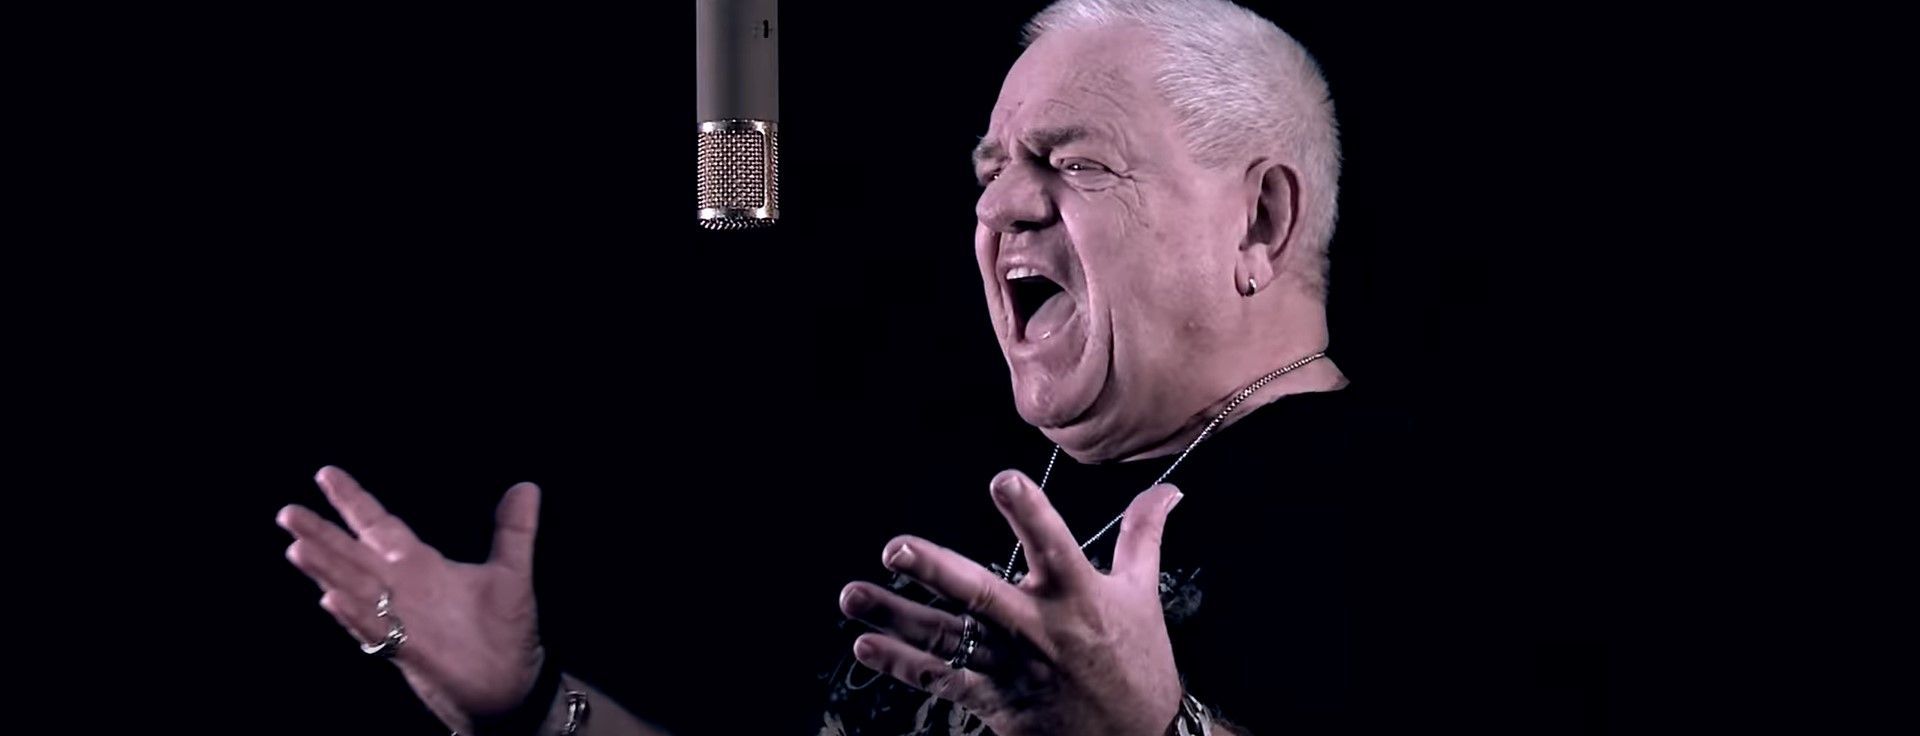 Dirkschneider & The Old Gang - Every Heart Is Burning (Official)